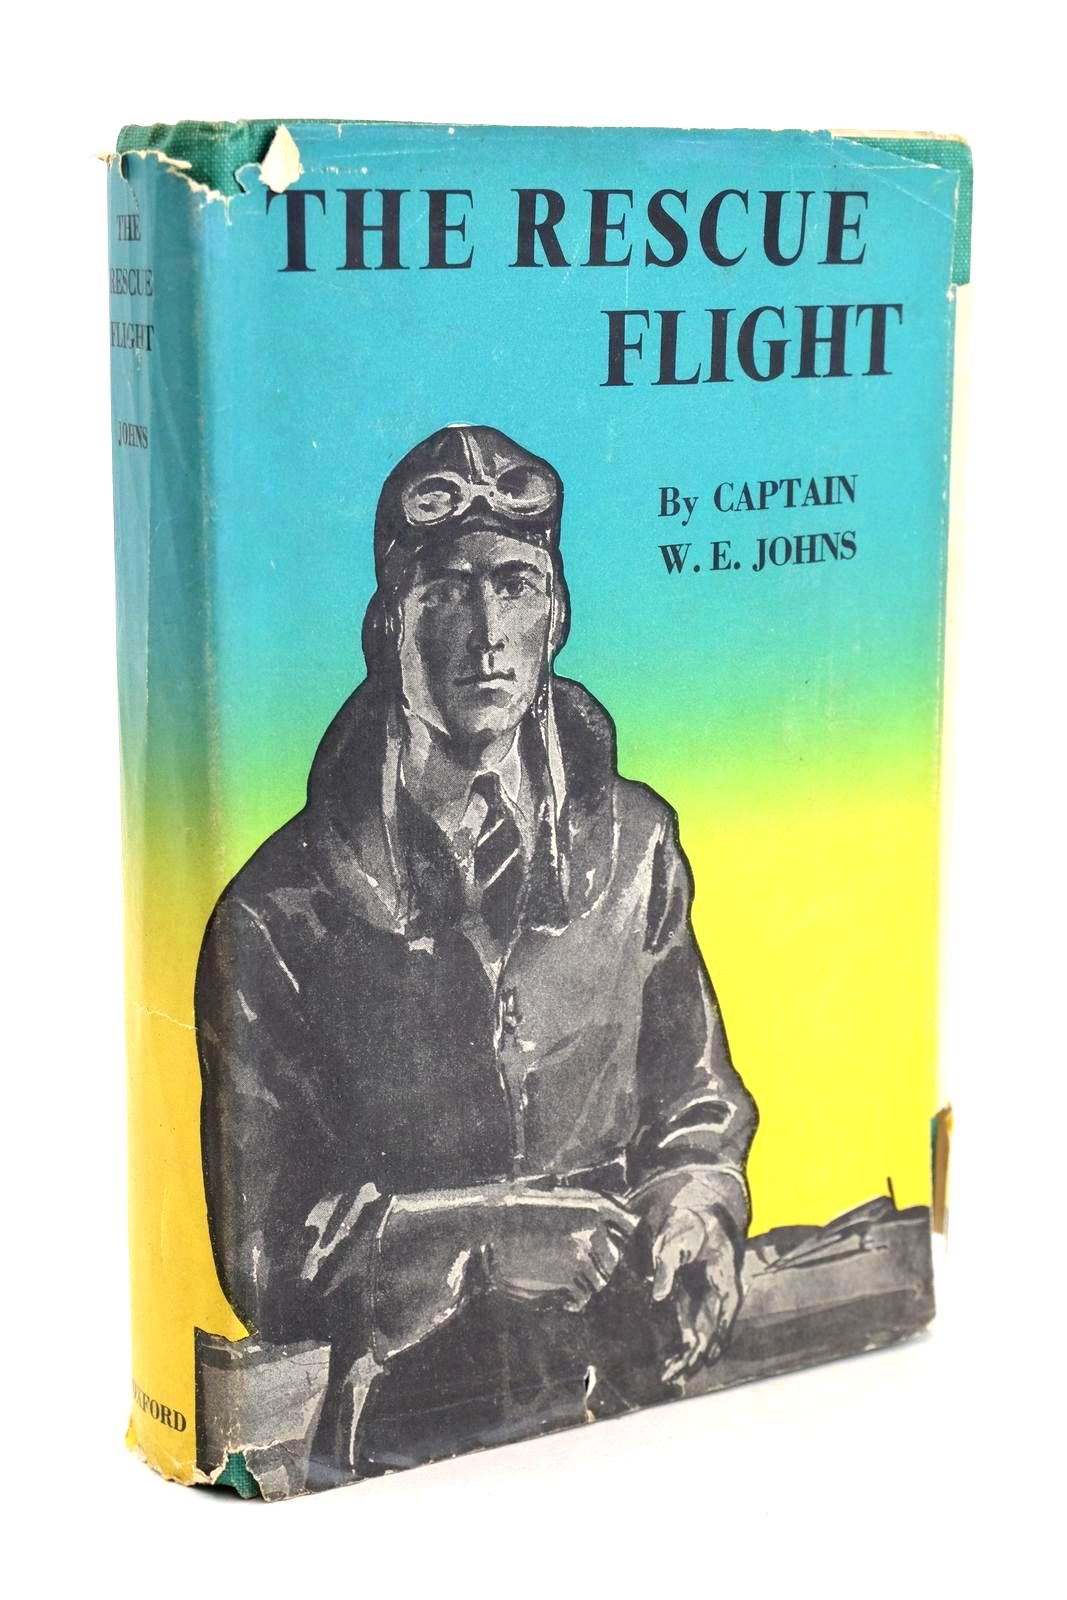 Photo of THE RESCUE FLIGHT written by Johns, W.E. illustrated by Sindall, Alfred published by Oxford University Press, Geoffrey Cumberlege (STOCK CODE: 1326487)  for sale by Stella & Rose's Books